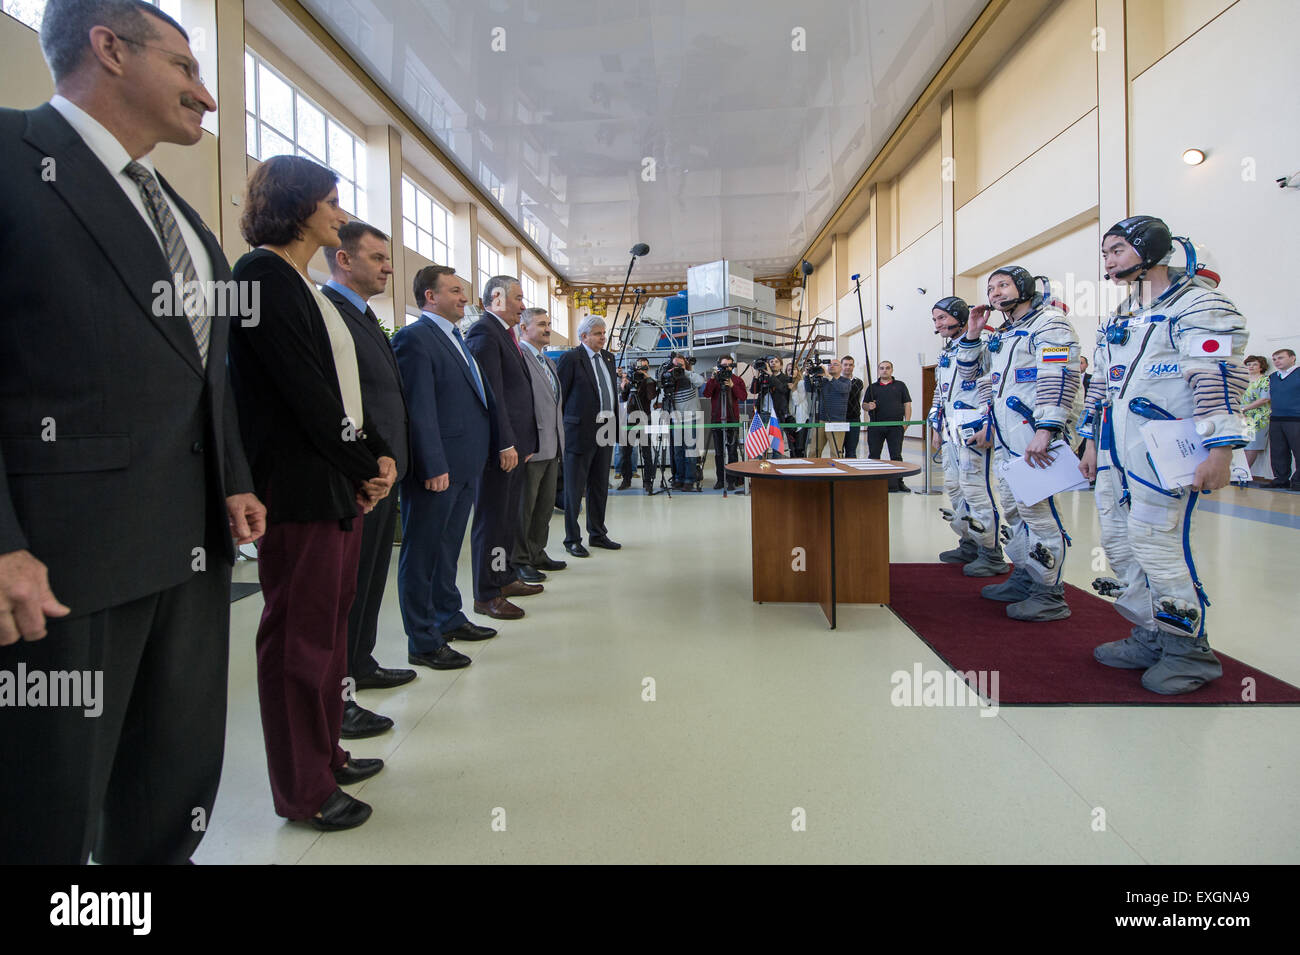 NASA astronaut Kjell Lindgren, Russian cosmonaut Oleg Kononenko, and Japan Aerospace Exploration Agency astronaut Kimiya Yui talk to officials during the second day of qualification exams, Thursday, May 7, 2015 at the Gagarin Cosmonaut Training Center (GCTC) in Star City, Russia. The Expedition 44/45 trio is preparing for launch to the International Space Station in their Soyuz TMA-17M spacecraft from the Baikonur Cosmodrome in Kazakhstan. Stock Photo